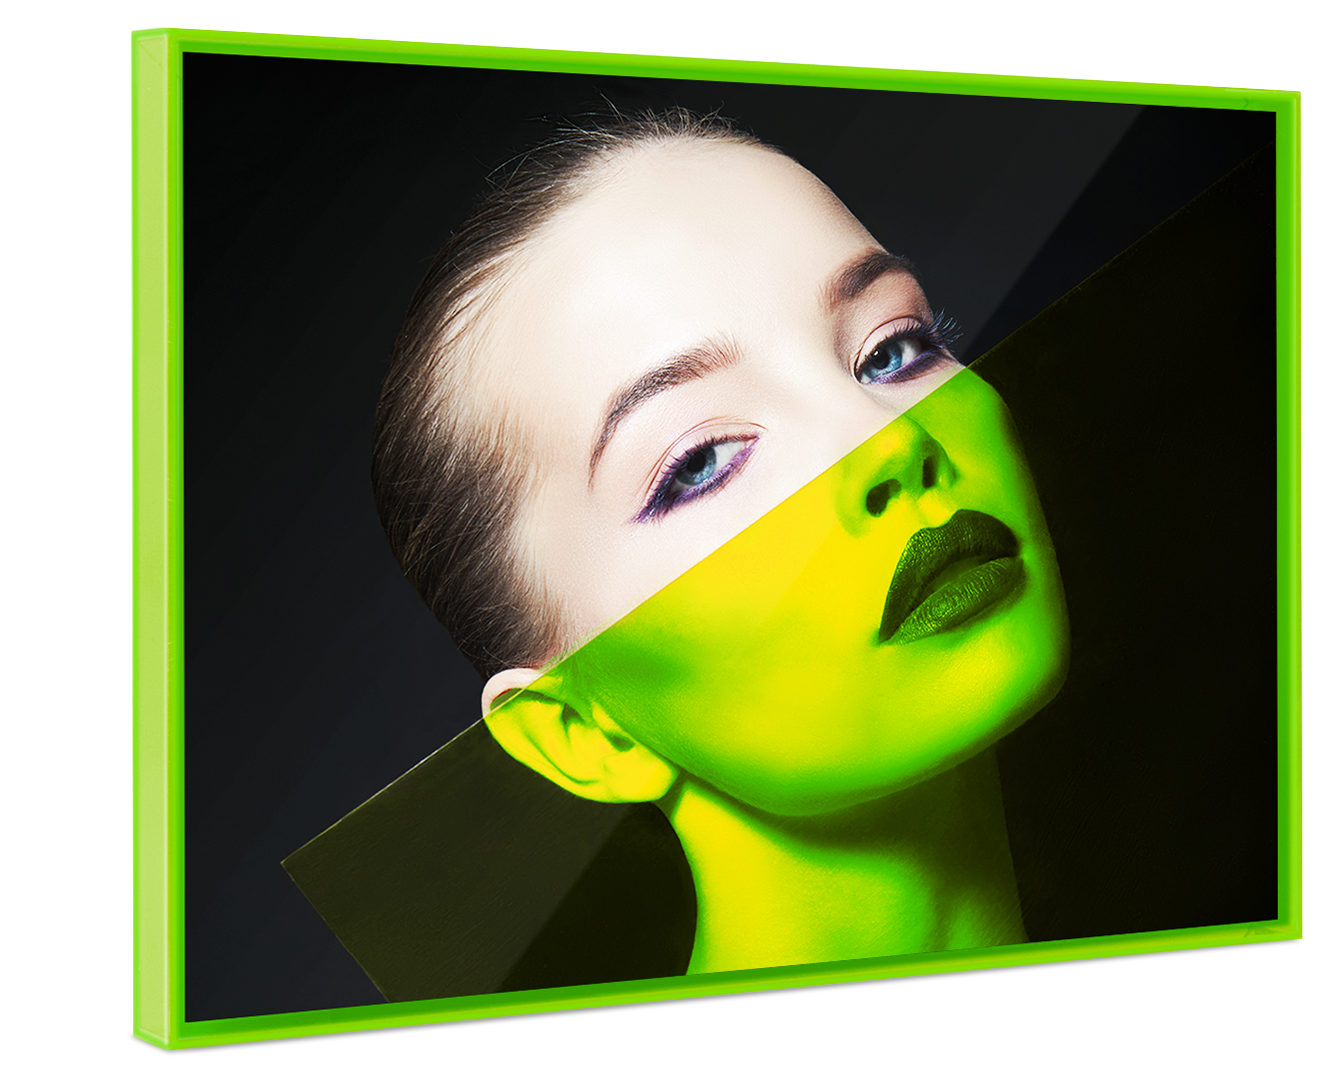 A portrait of a woman's face holding a green plastic disc diagonally in front of her face. The green of the plastic disc corresponds to the green of the Pop Art Frame.